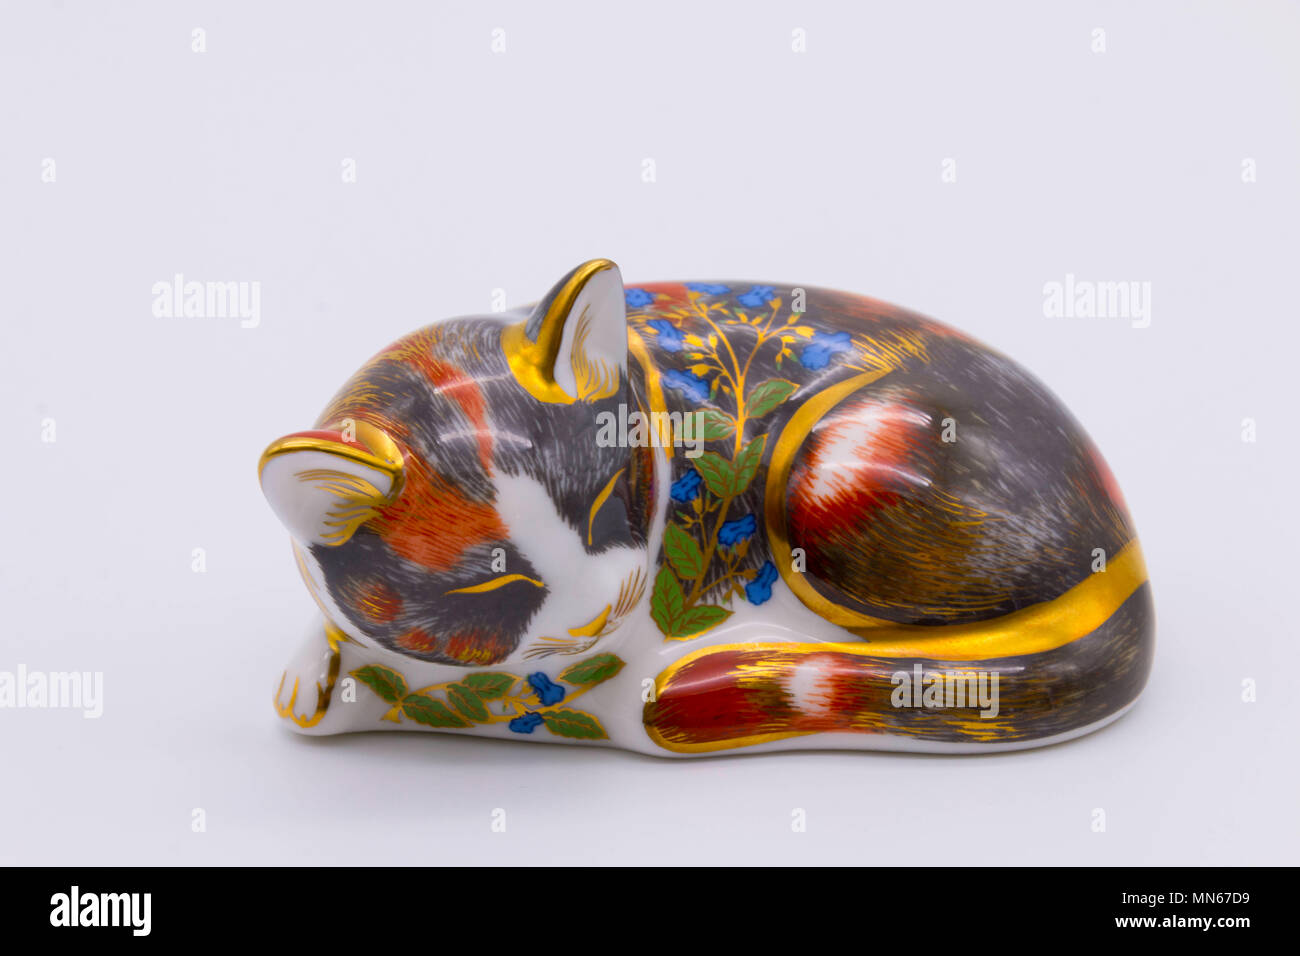 Royal Crown Derby bone china paperweight pf a cat uk Stock Photo